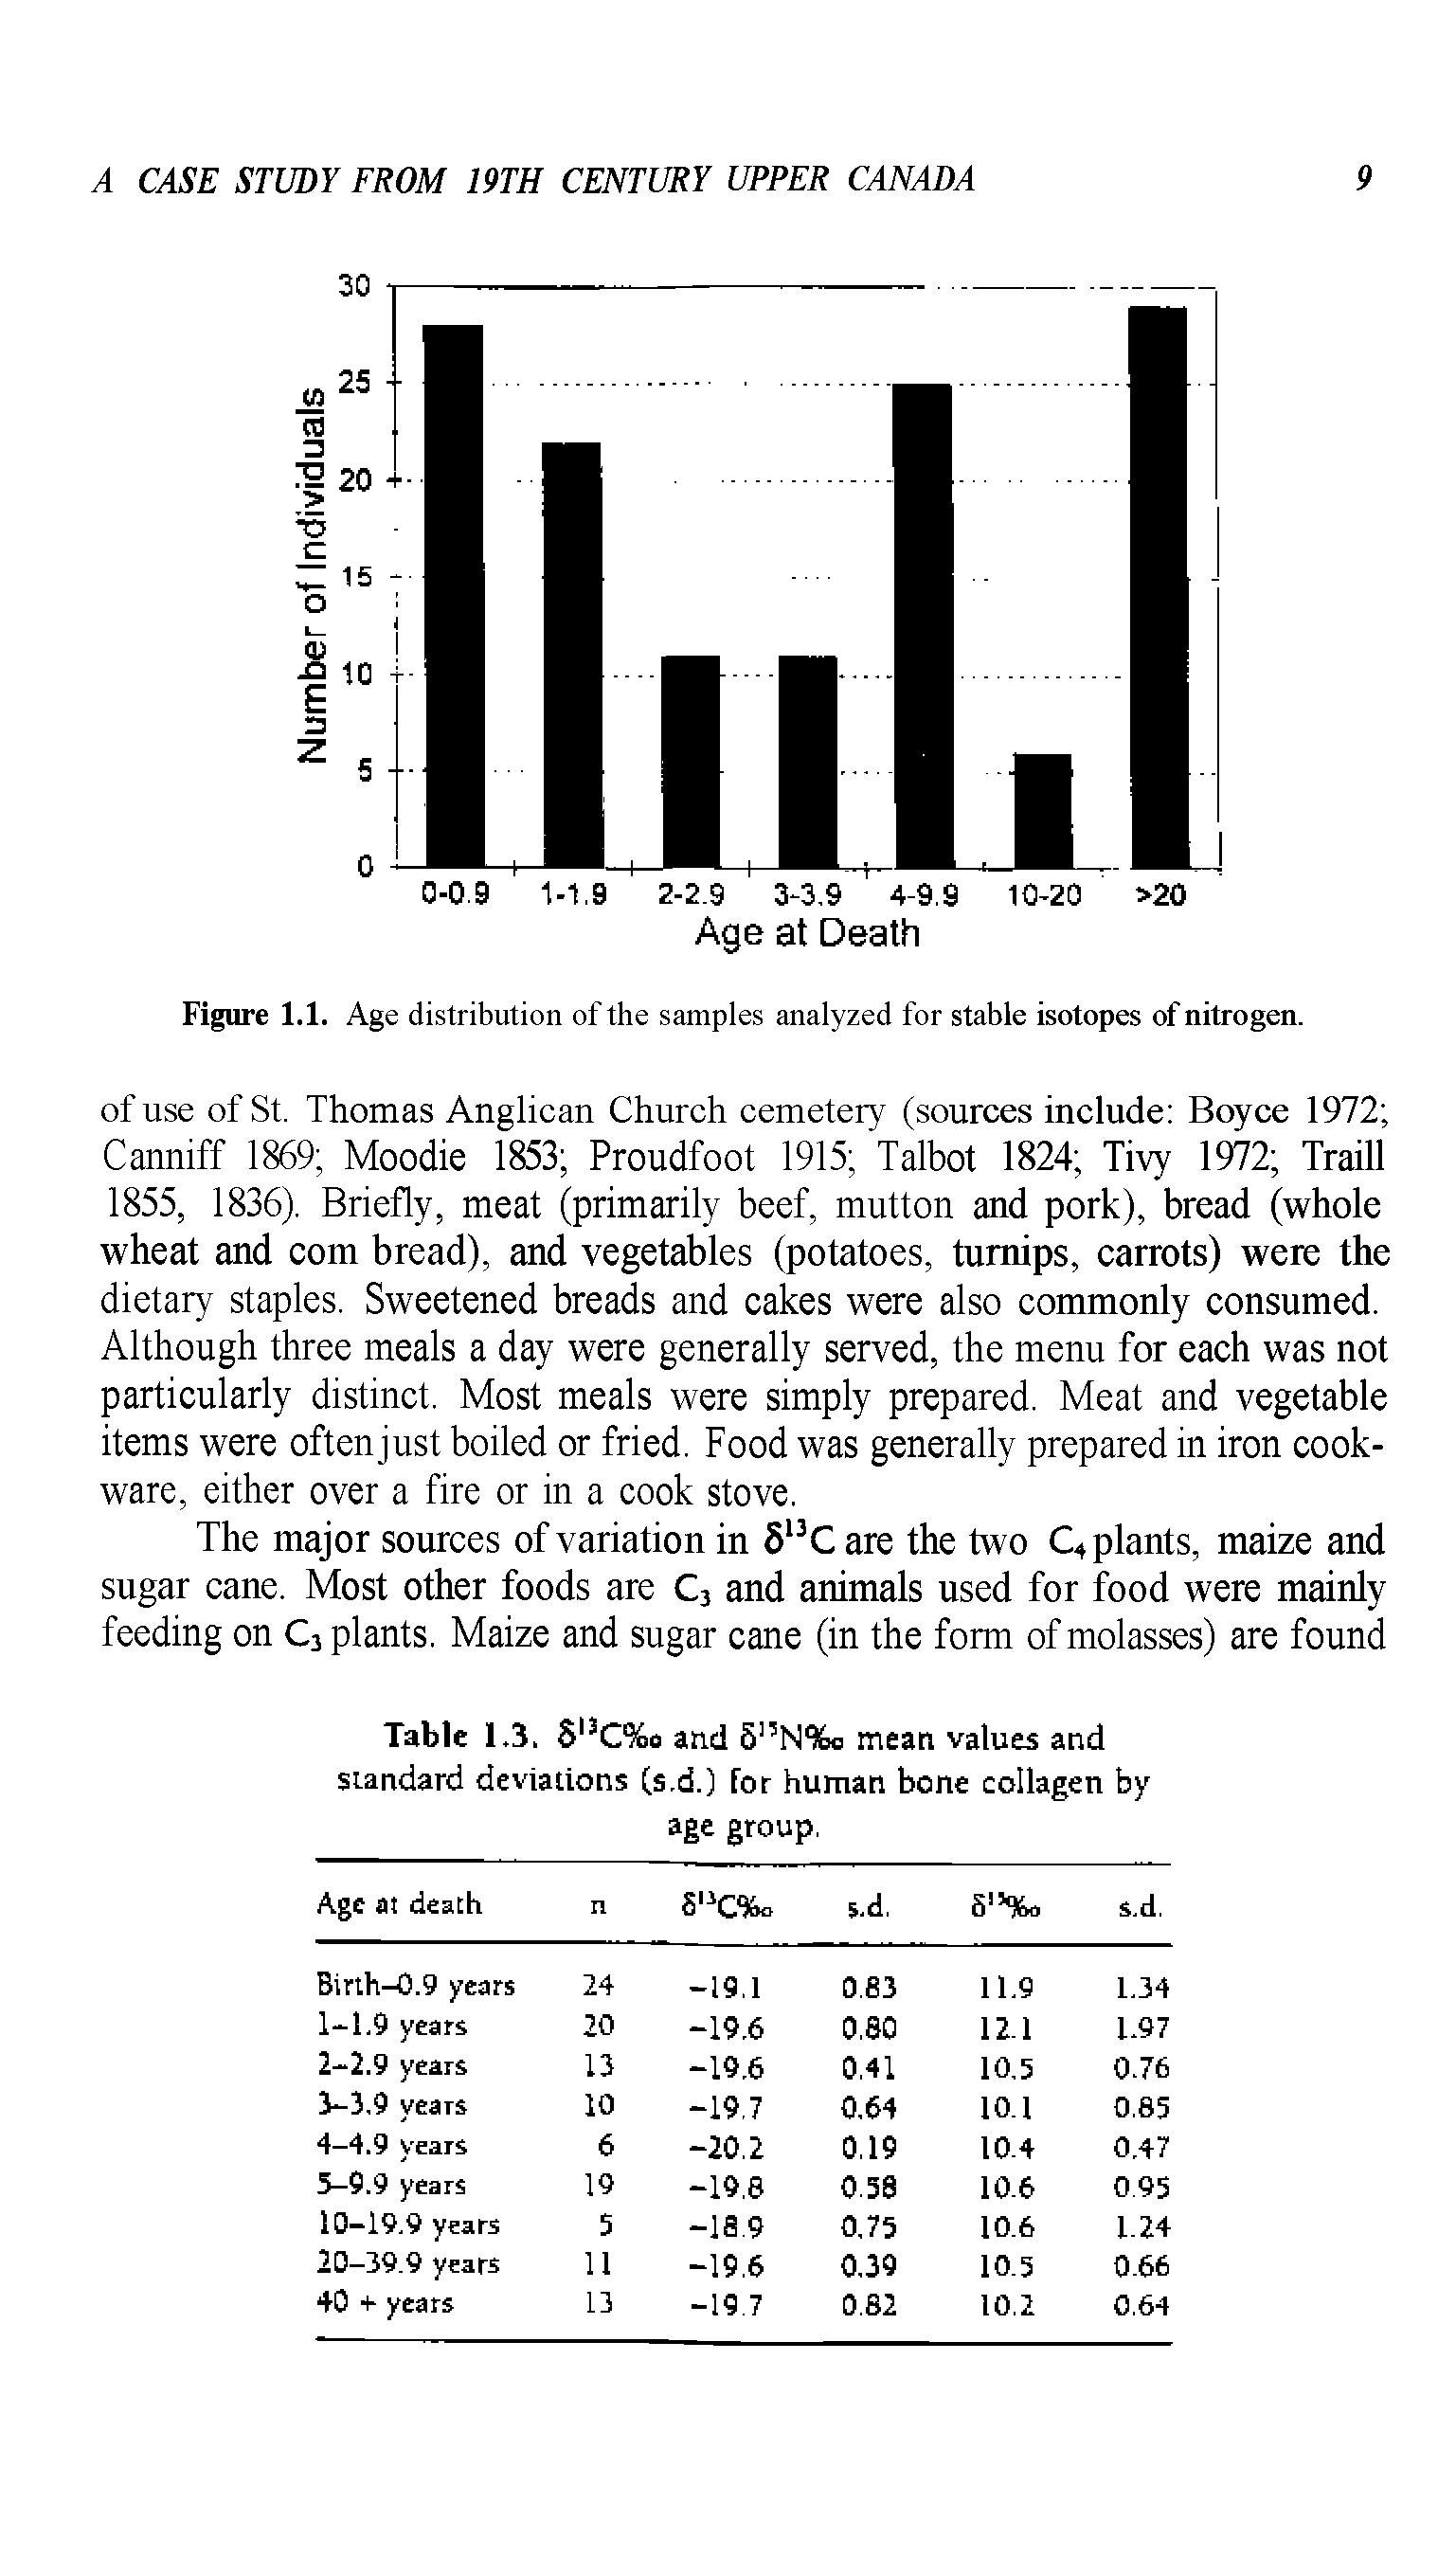 Figure 1.1. Age distribution of the samples analyzed for stable isotopes of nitrogen.